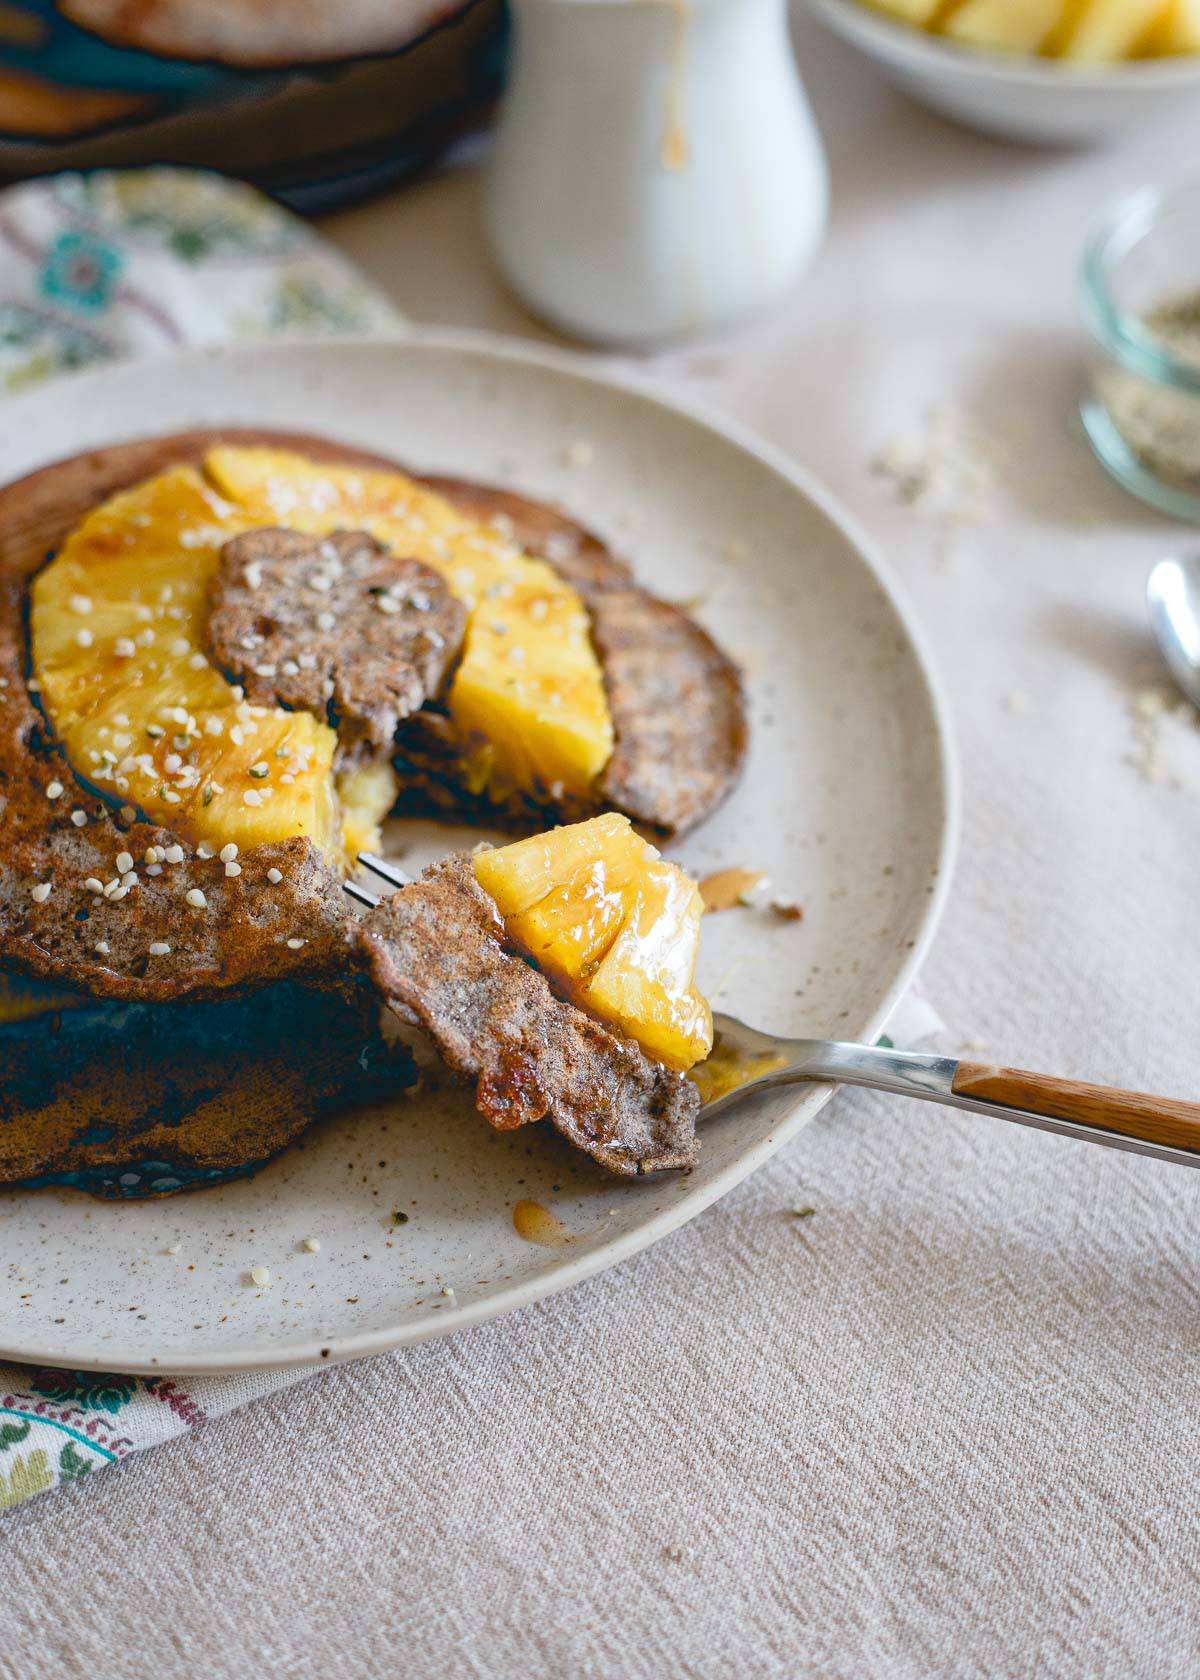 Kick off breakfast with a stack of these pineapple buckwheat pancakes studded with nutritious hemp seeds.